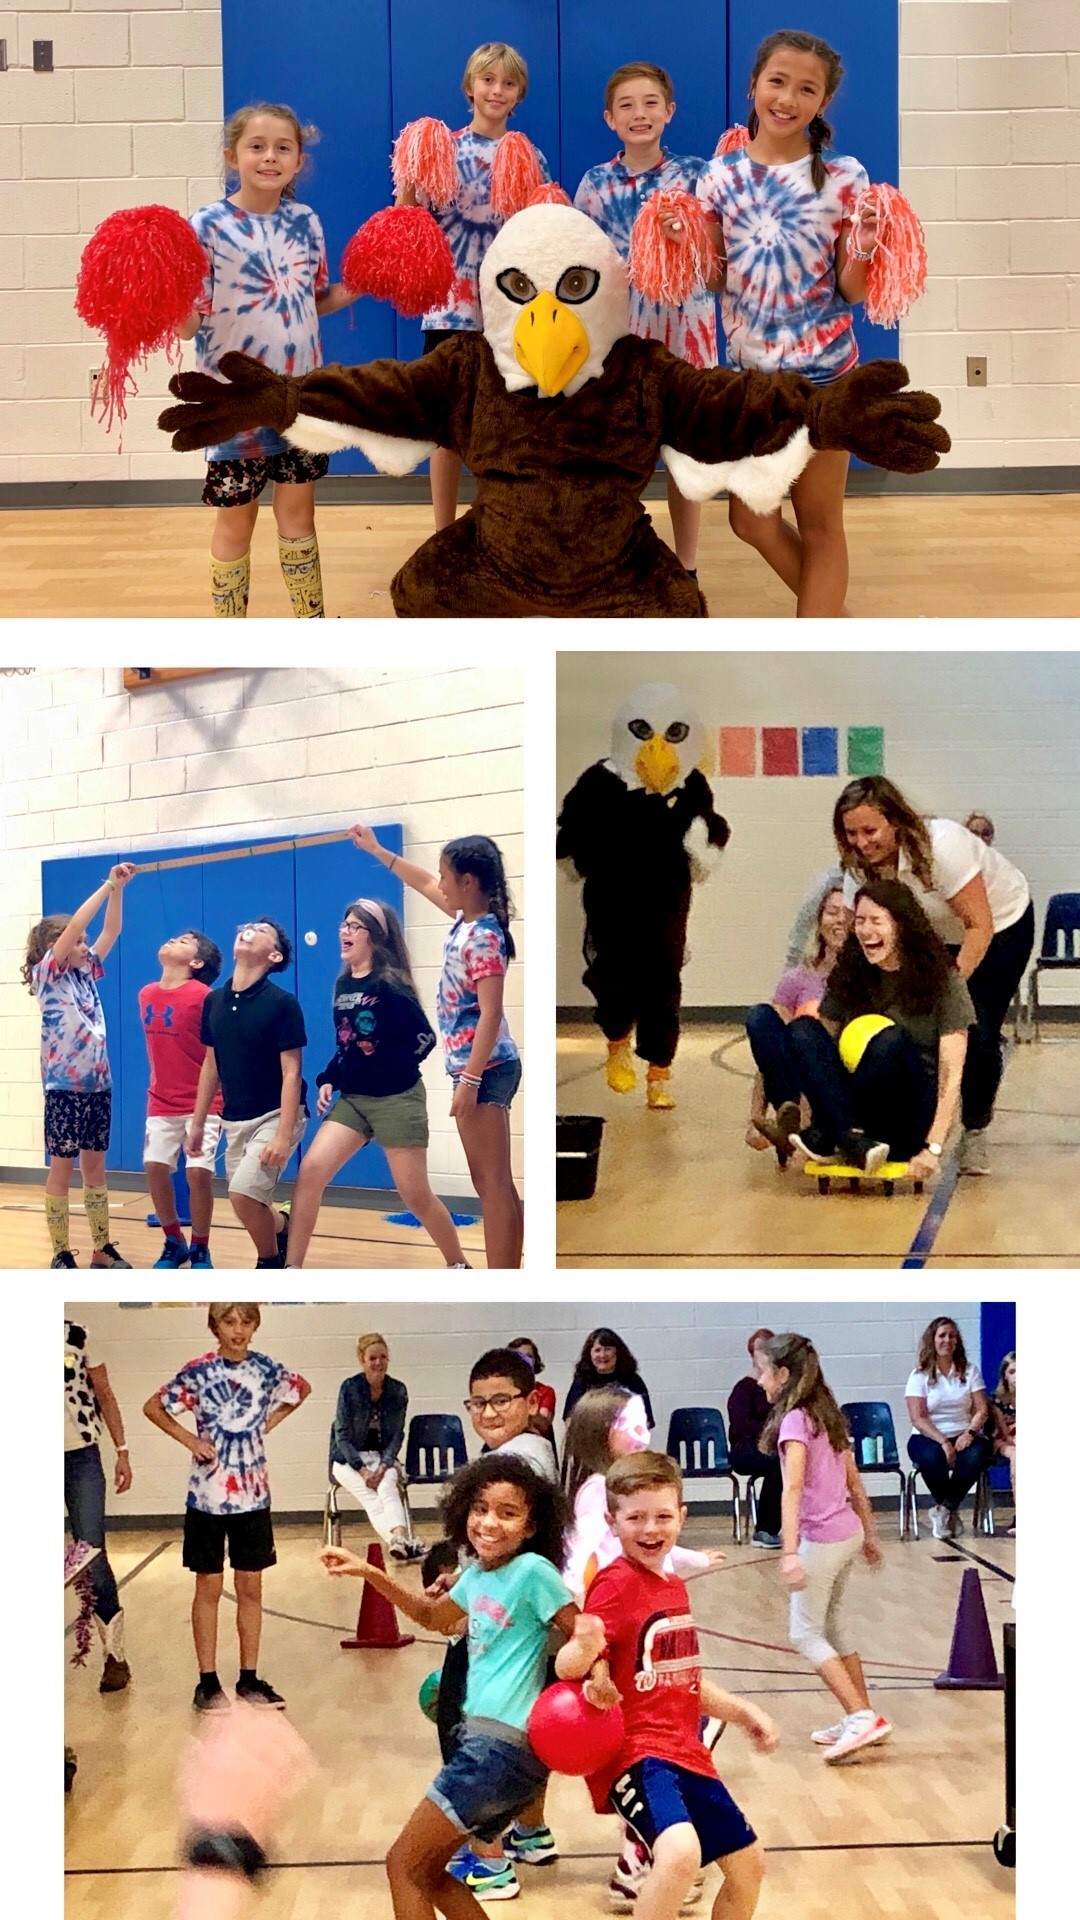 A collage shows students participating in various fun activities alongside Clermont's mascot, Ernie the Eagle.